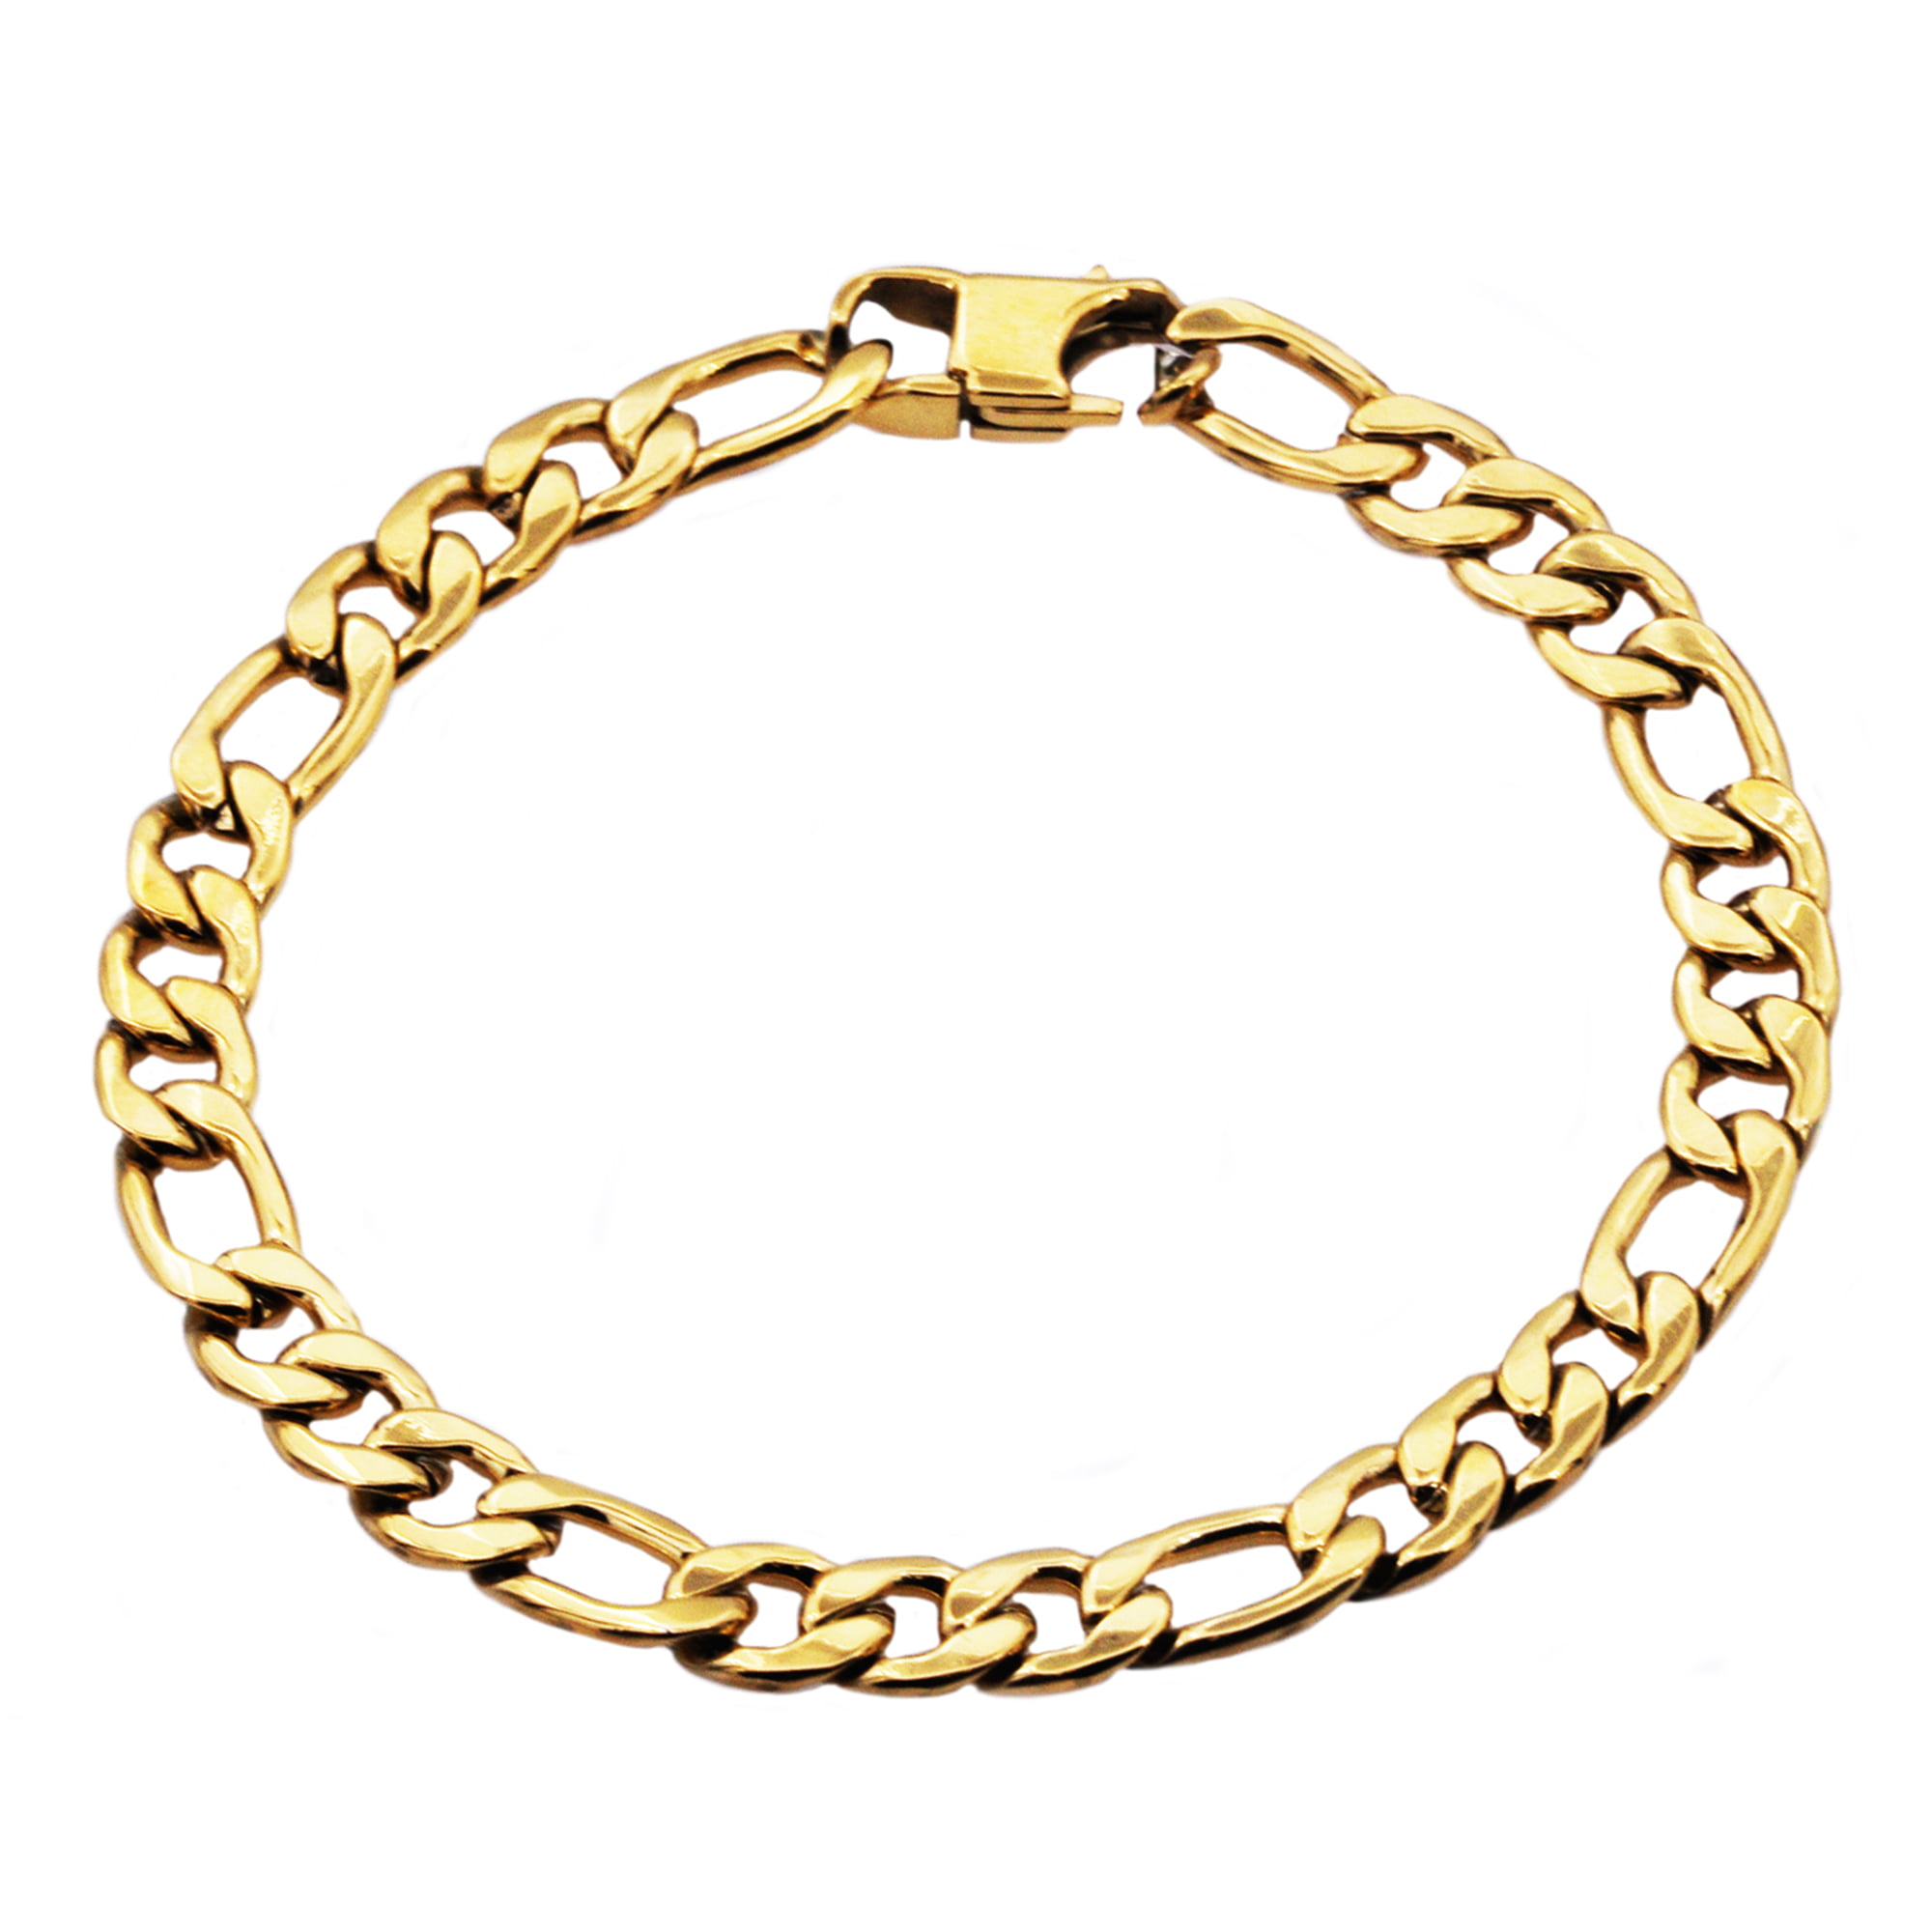 Arista Gold Plated Solid Stainless Steel Men's Figaro Link Chain ...